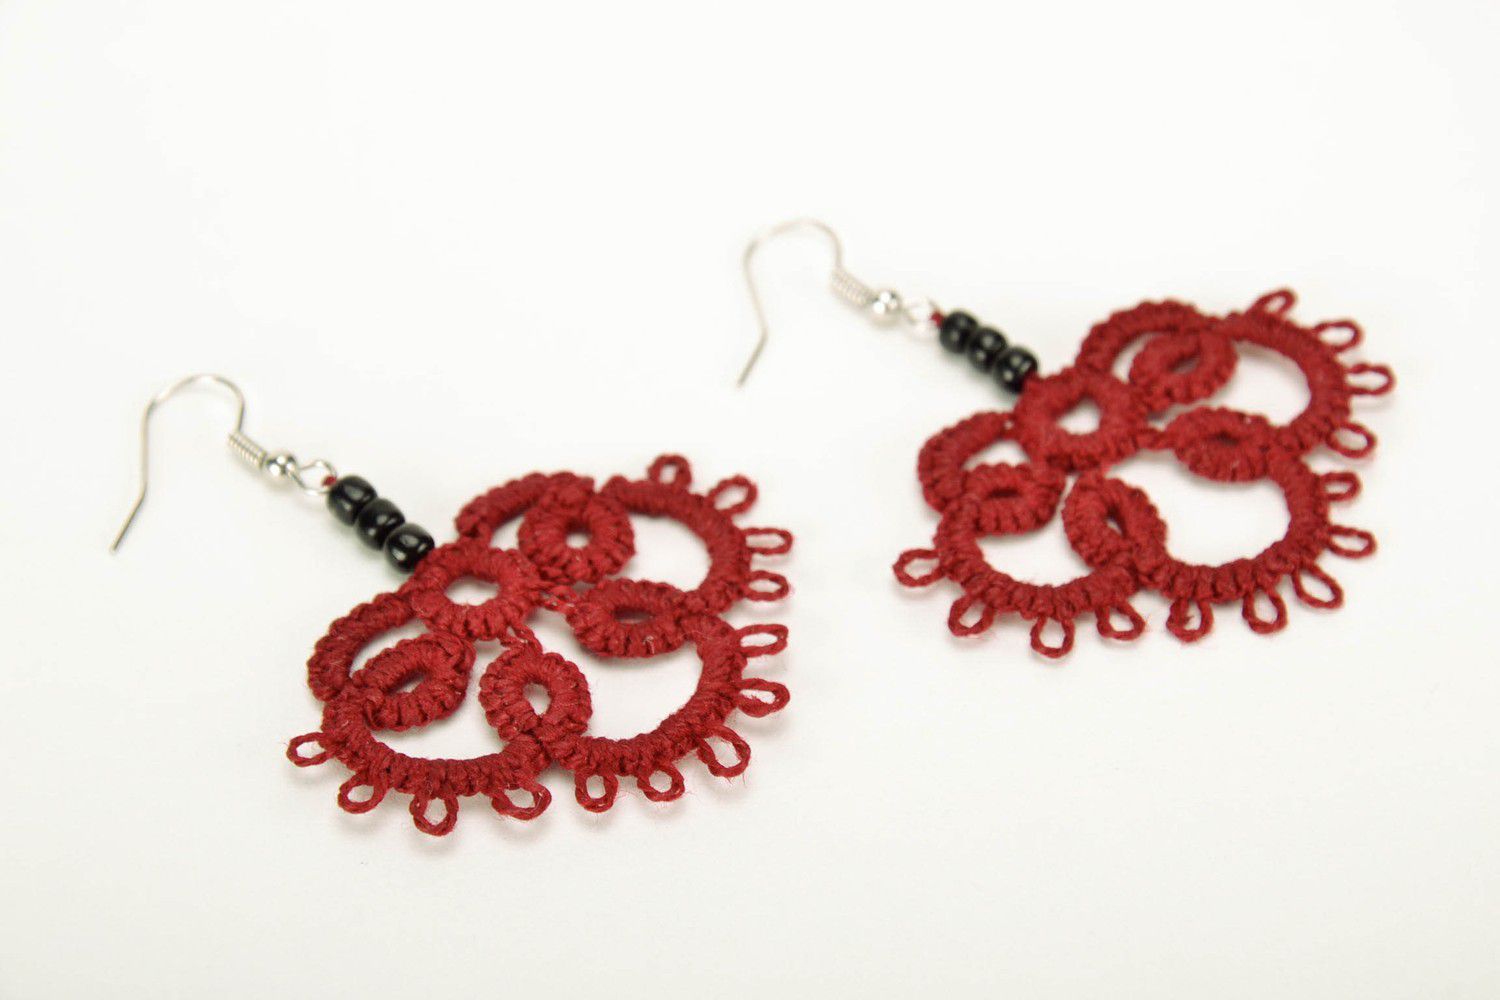 Earrings made from woven lace Claret Clover photo 1